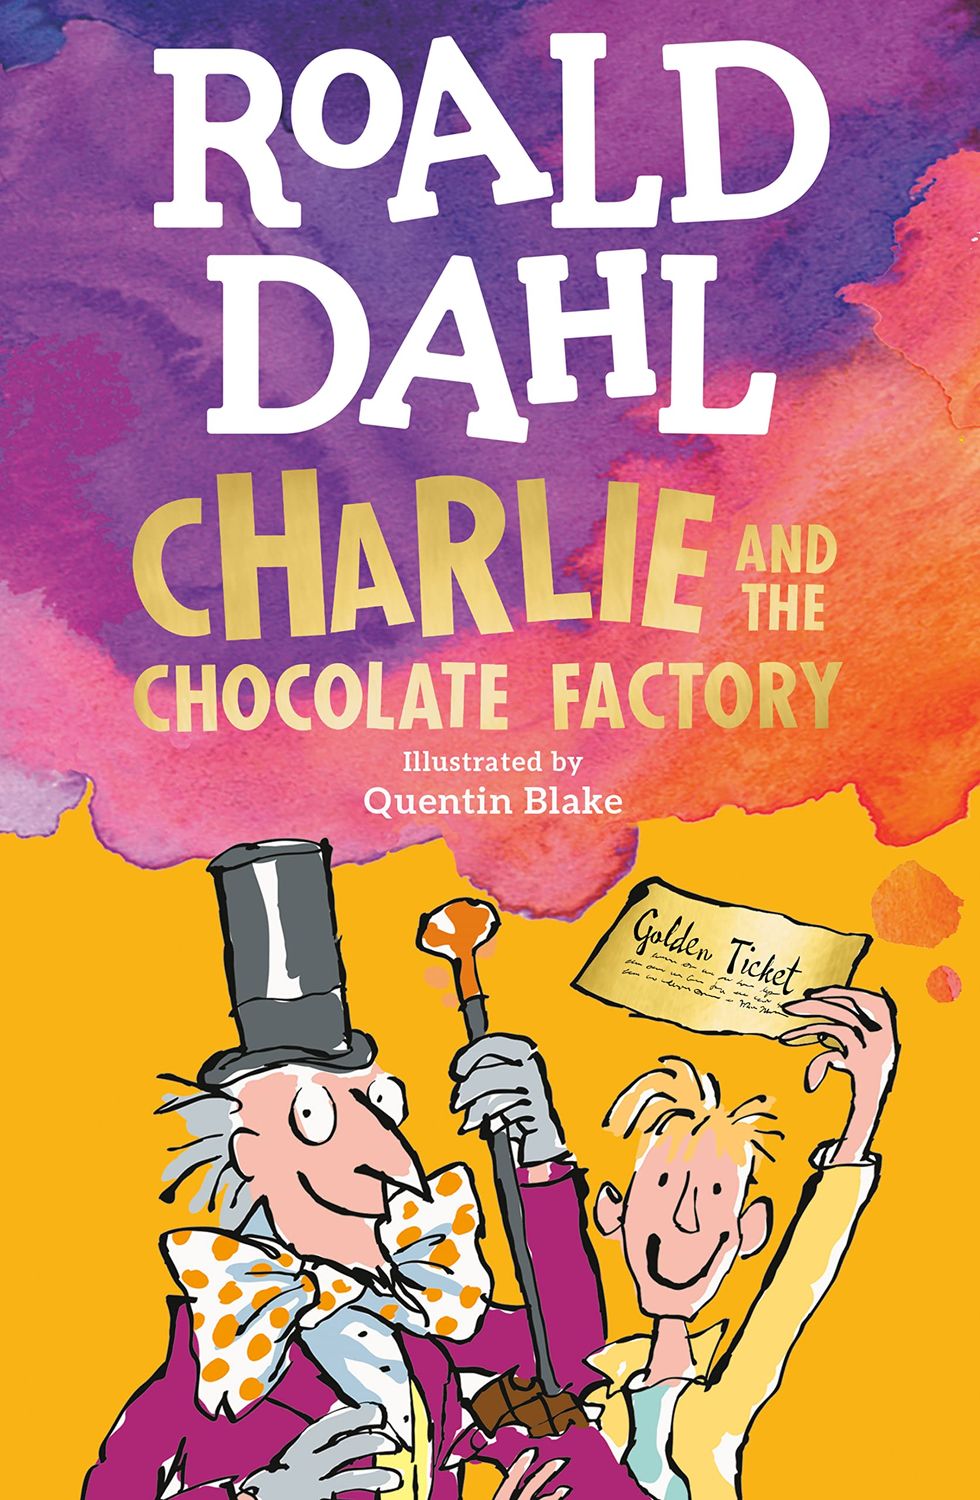 'Charlie and the Chocolate Factory'